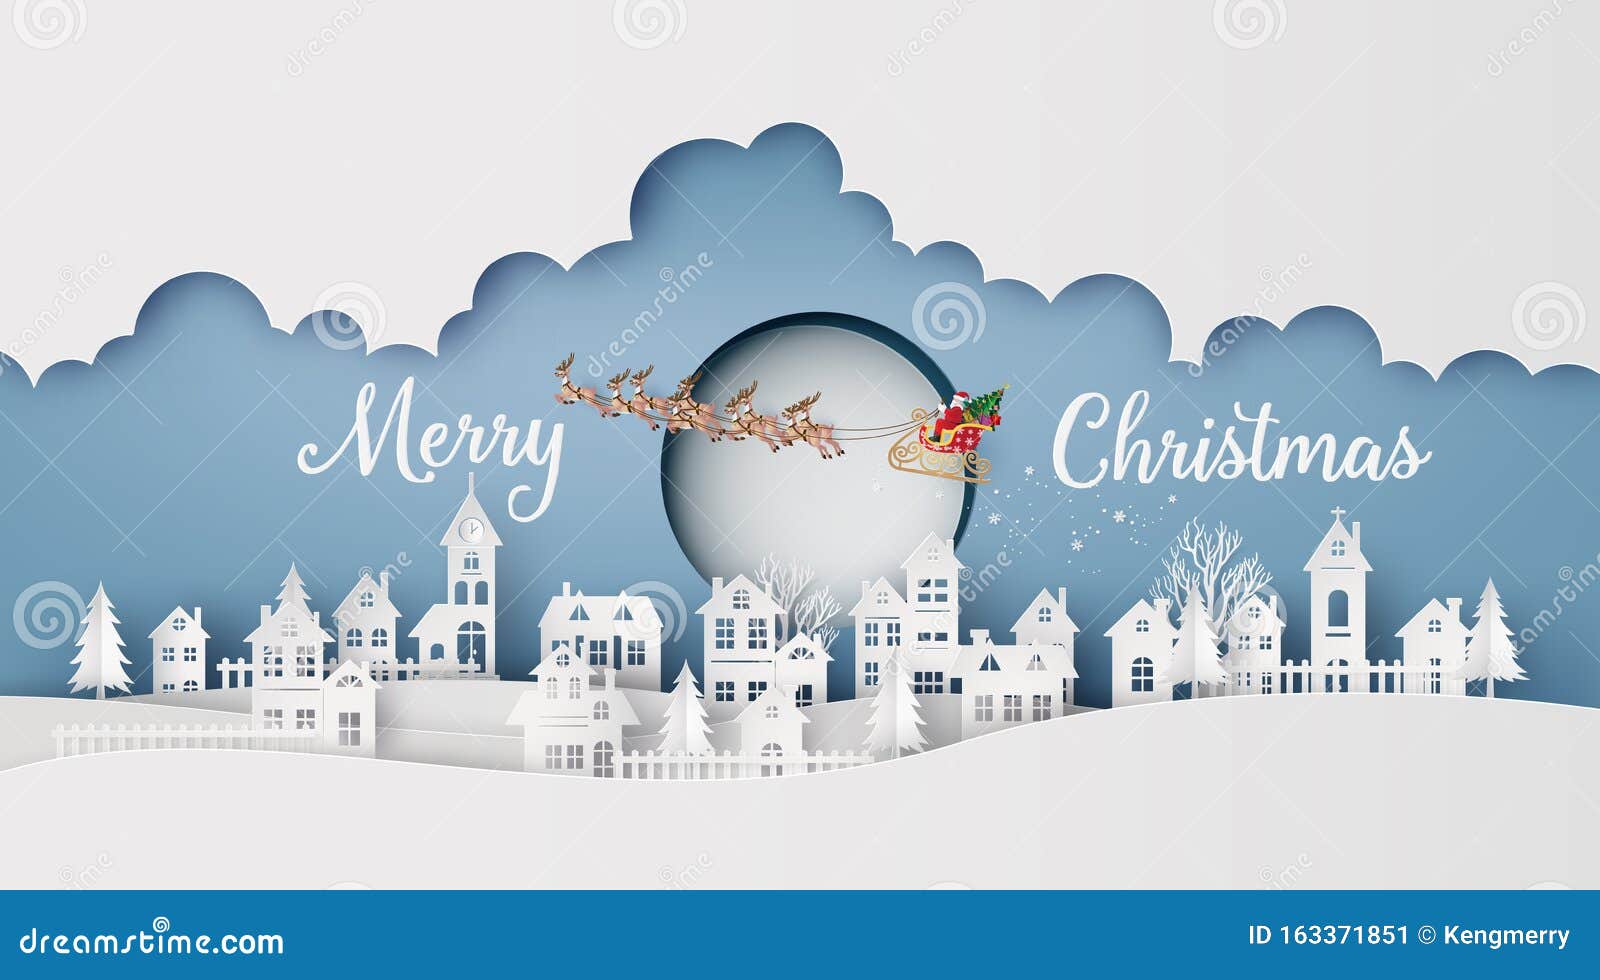 merry christmas and happy new year ,paper art and craft style